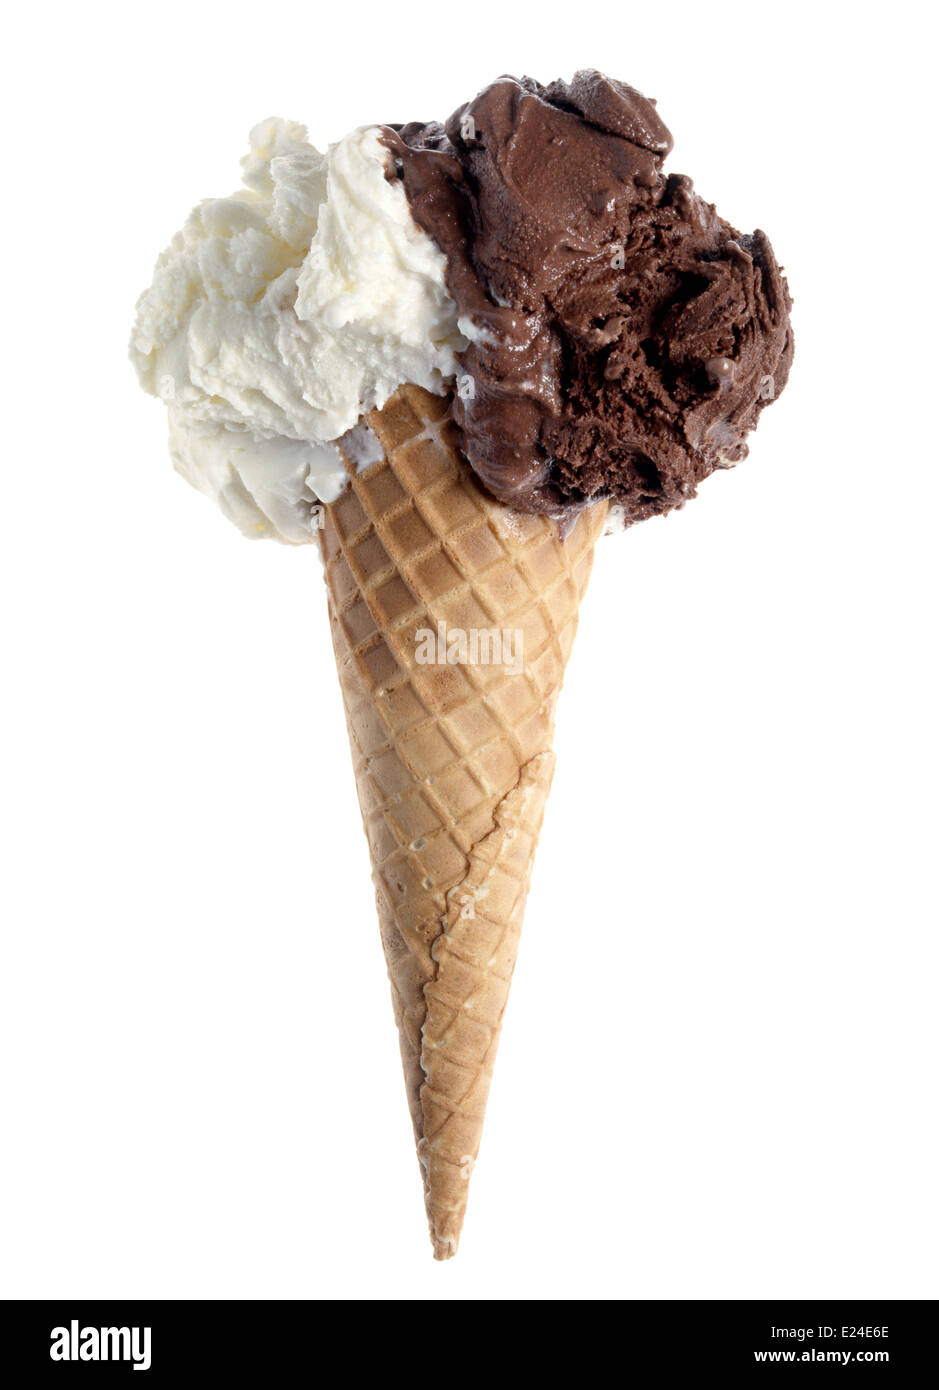 How much ice cream is in a double-scoop cone compared to a single